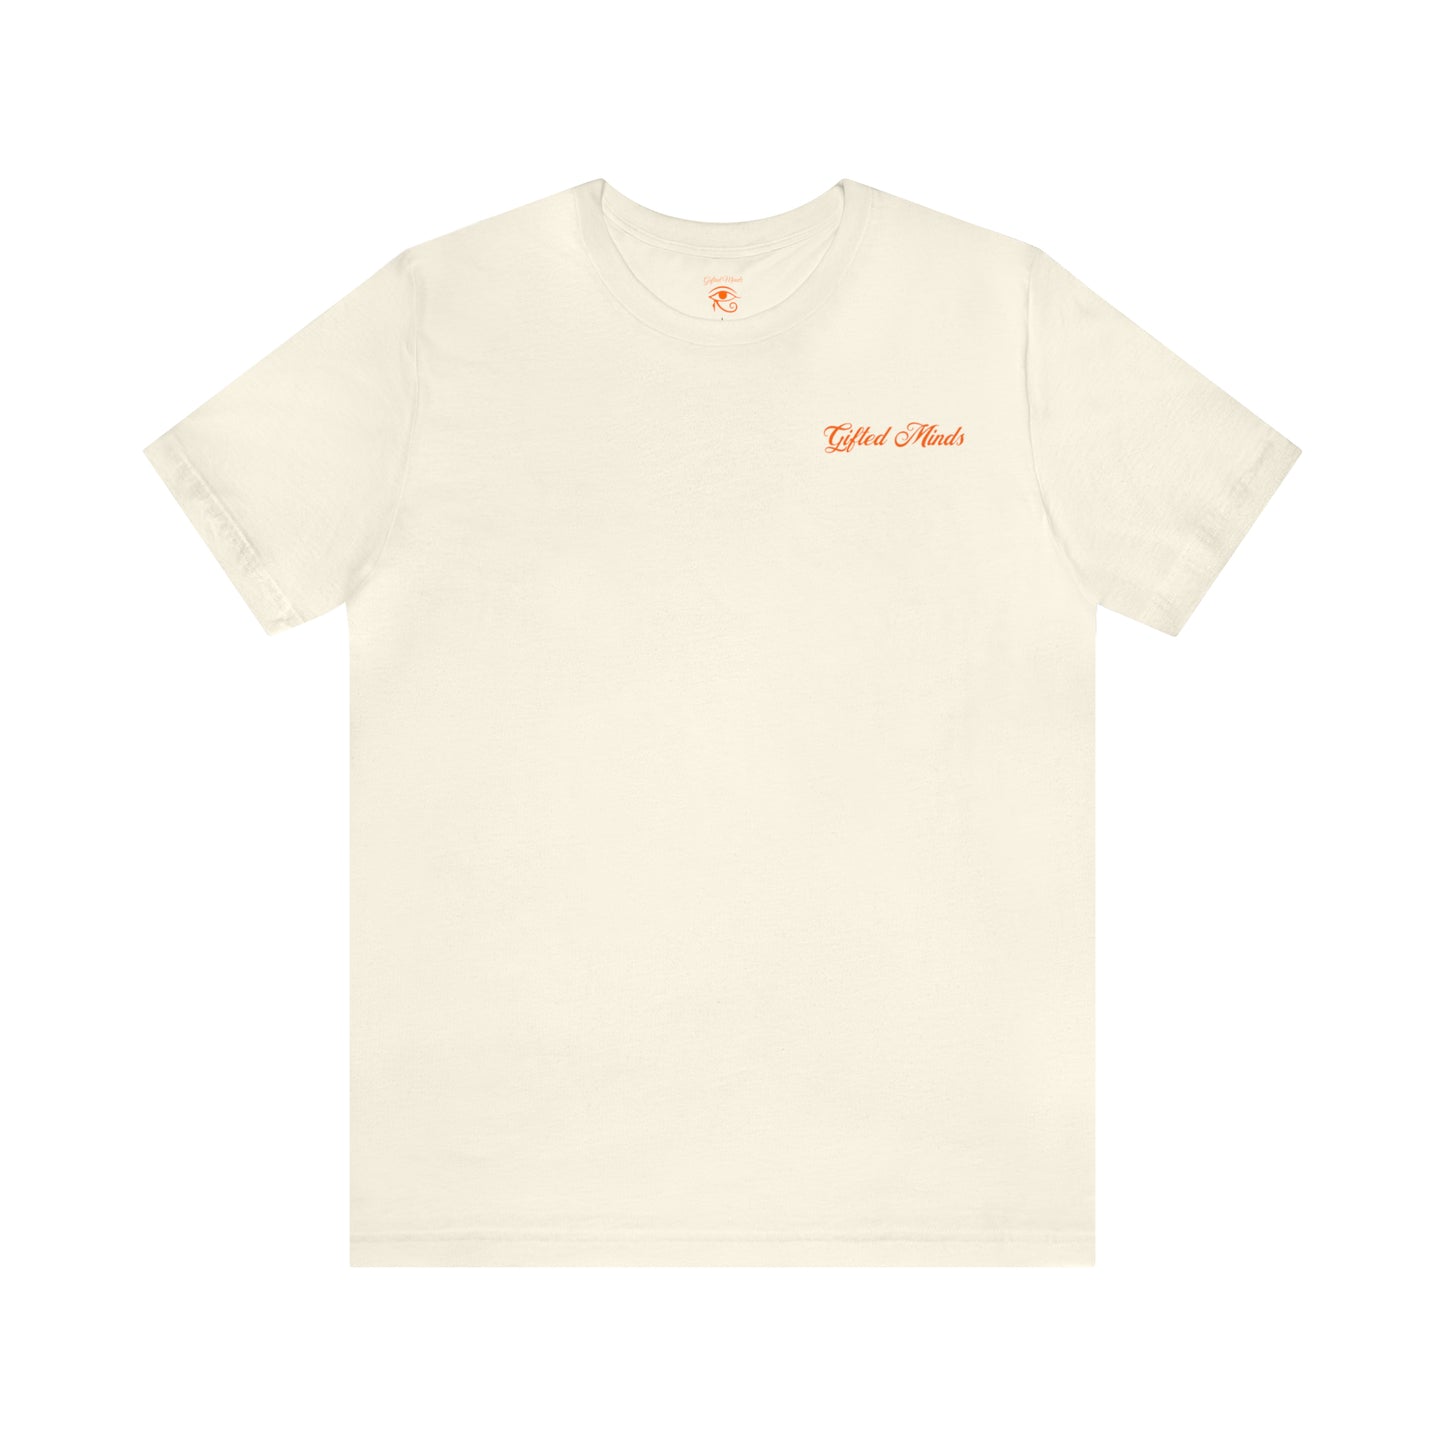 Paradise is Now Short Sleeve Tee - GFTD MNDS